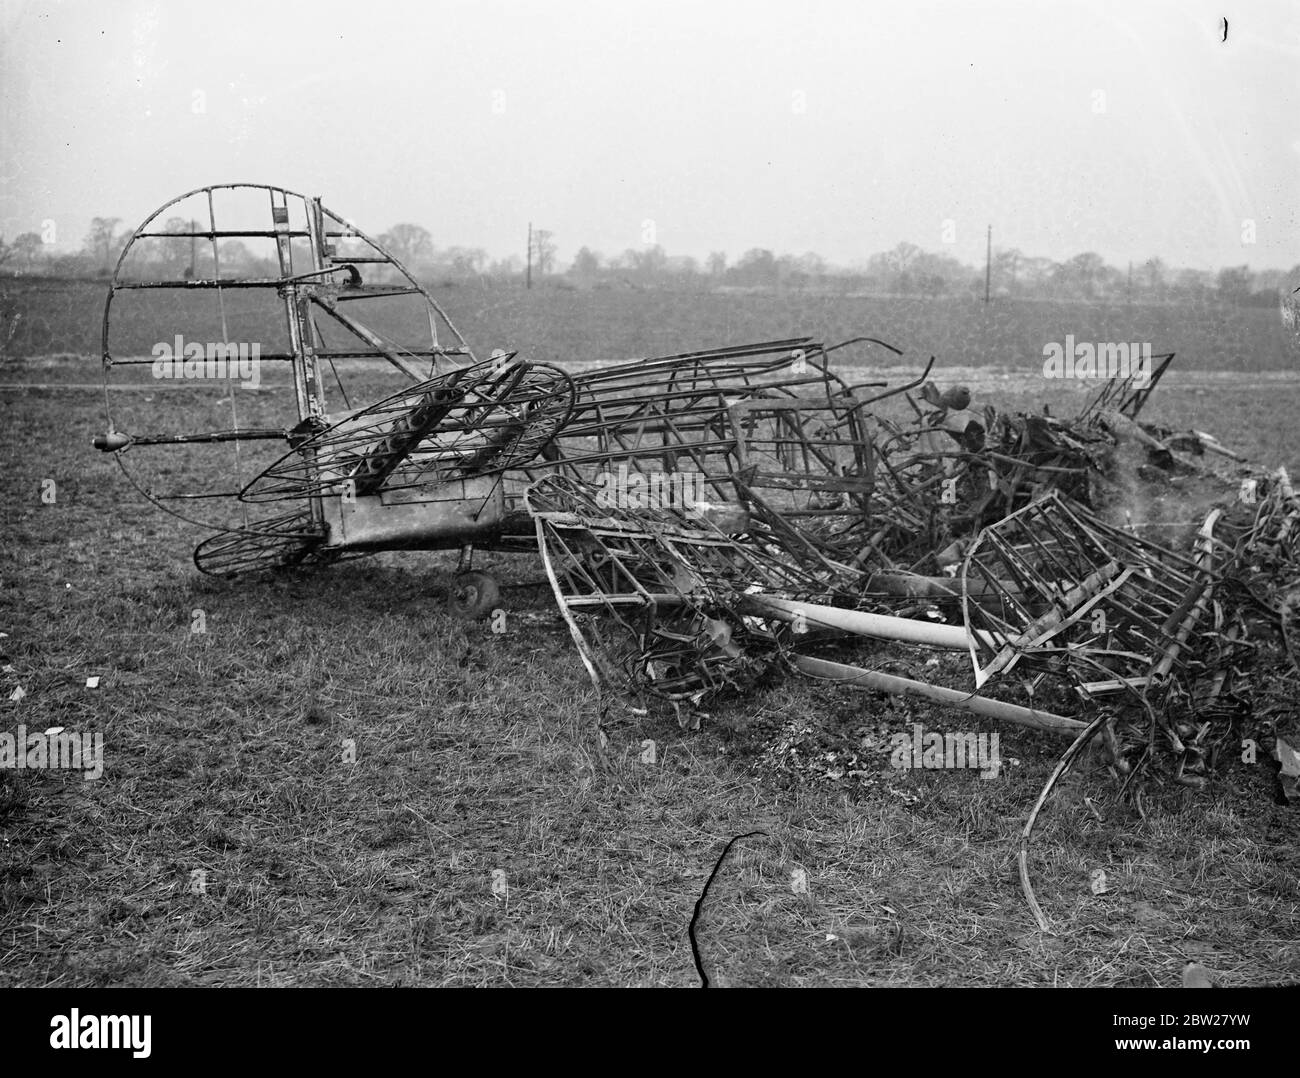 Three die when RAF and civil plane collided over Hertfordshire. Planes crash in brickworks. Three men, an RAF officer and a pilot instructor and pupil were killed when a Gloucester Gauntlet Plane from Duxford and a de Havilland Tiger Moth plane collided in midair and crashed in flames at Smallford, near St Albans, Hertfordshire. The service plane fell in a field adjoining a brickyard and the civil machine, crashed into a gravel pit, causing 20 men to run for their lives. Photo shows, the tangled wreckage of the RAF plane in the field. 21 January 1938 Stock Photo